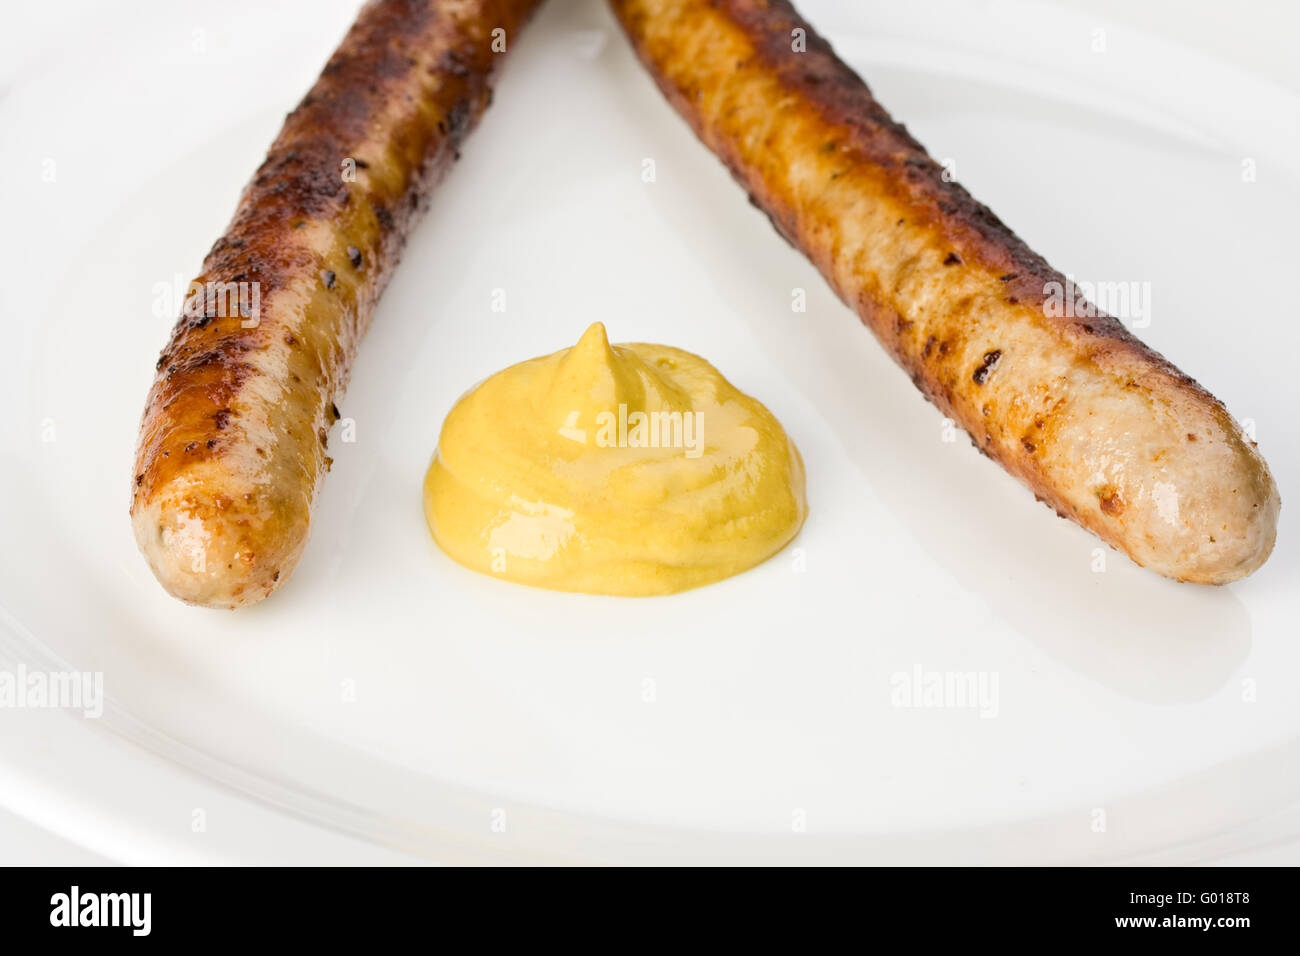 two grilled sausages on a plate with mustard Stock Photo